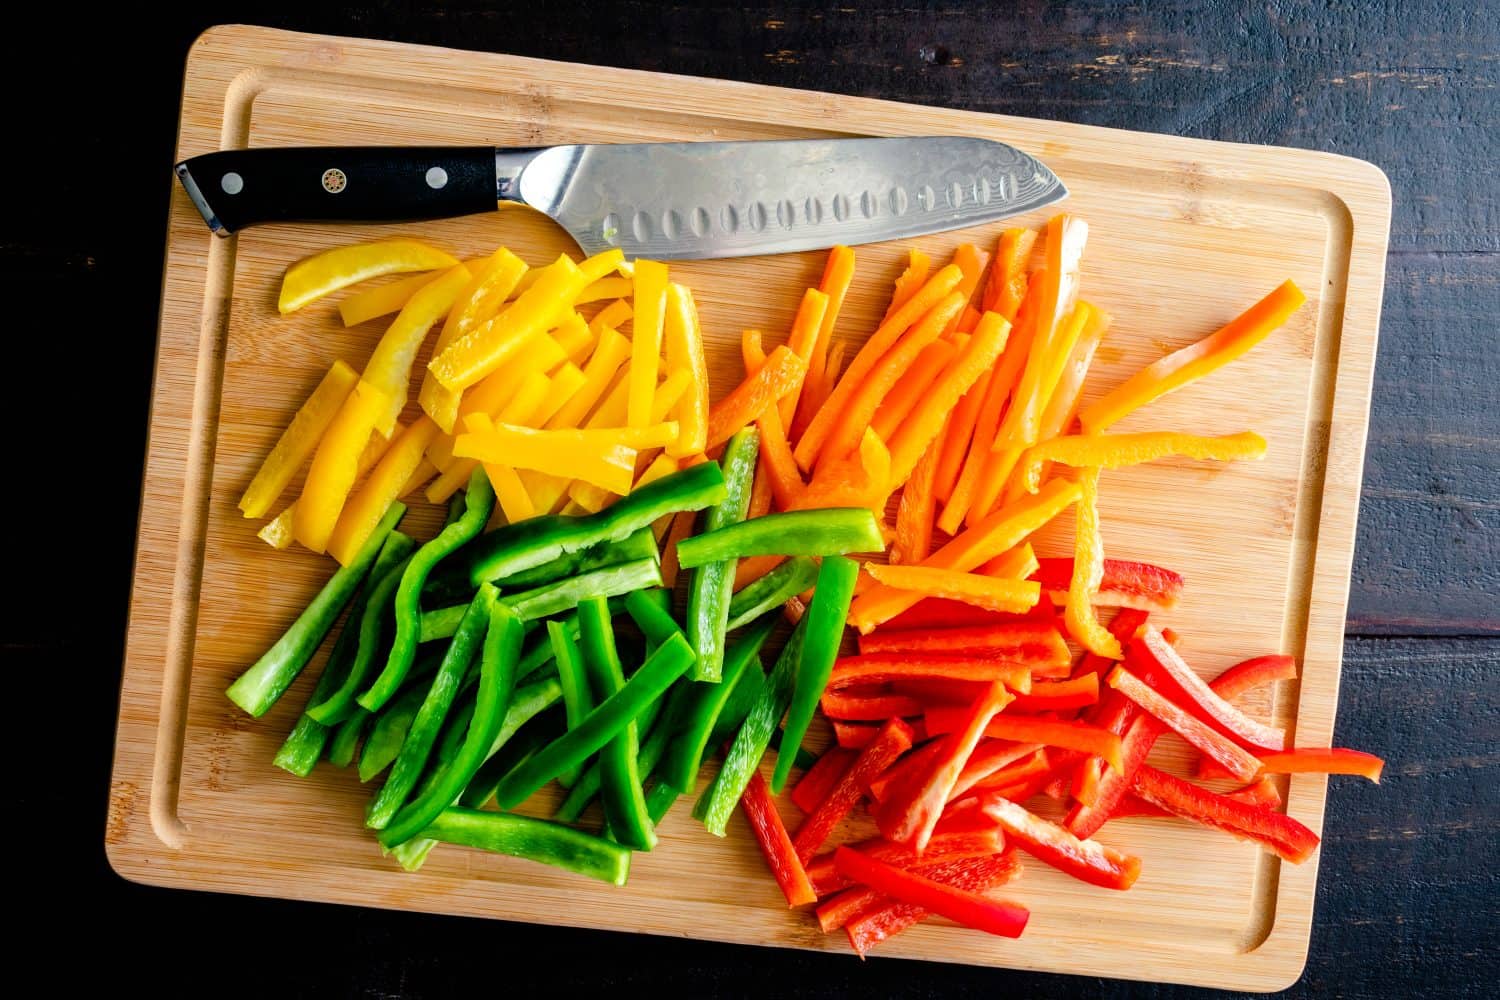 Red, Orange, Yellow, and Green Bell Peppers Cut into Thin Strips: Bell peppers cut in batonnets on a bamboo cutting board with a chef's knife